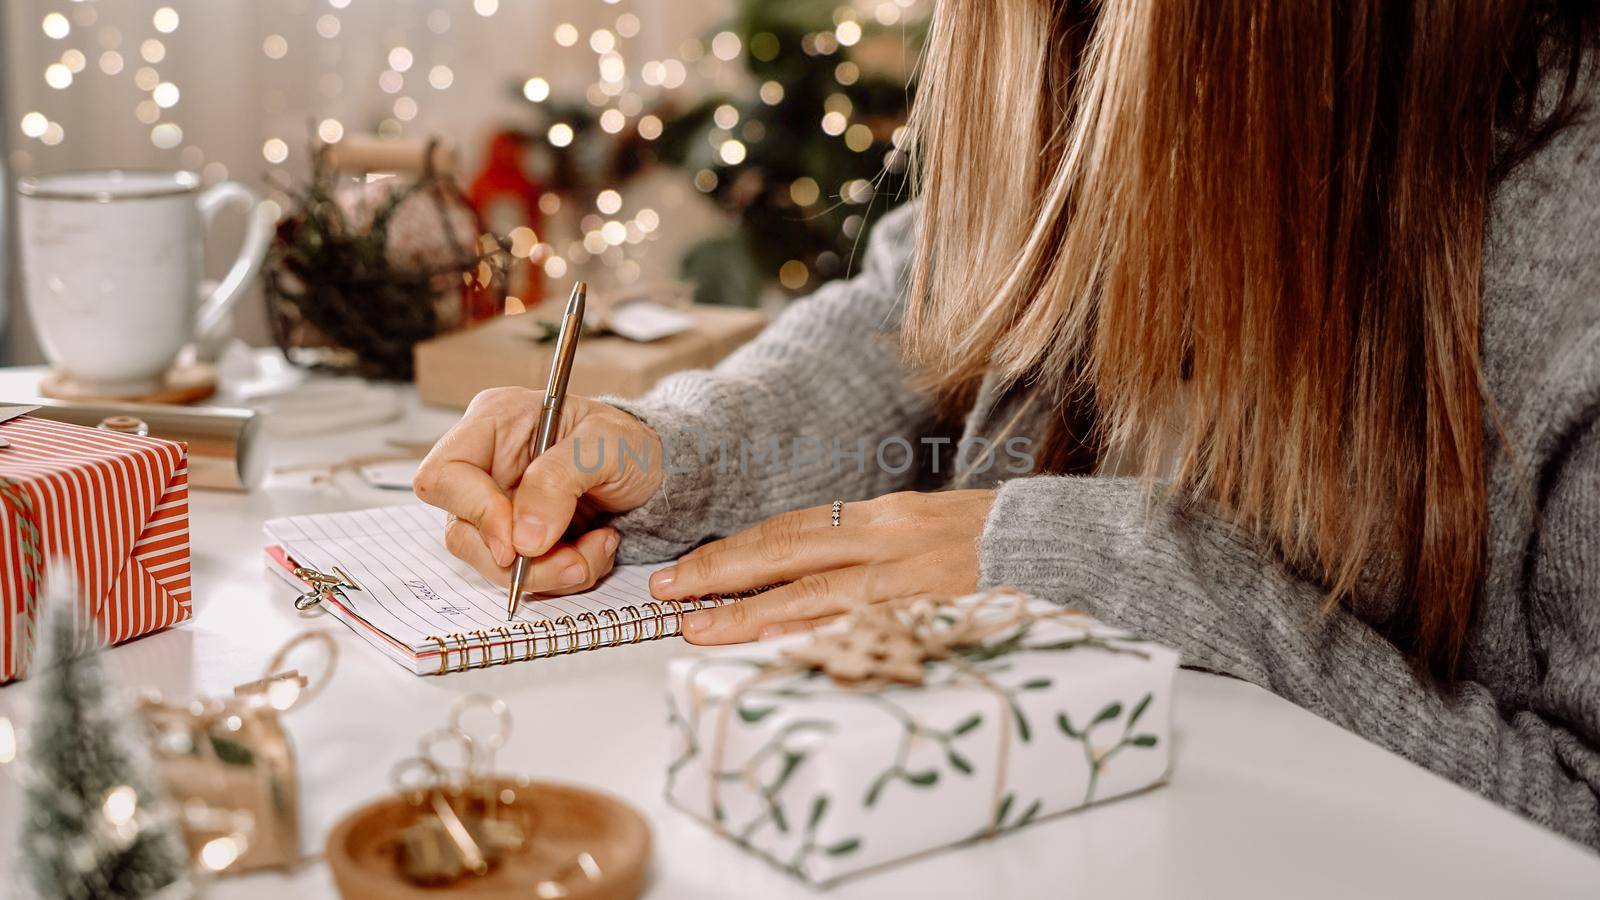 Goals plans make to do and wish list for new year christmas concept, girl writing in notebook. Woman hand holding pen on notepad at home on winter holidays xmas. Christmas decoration, gift boxes.